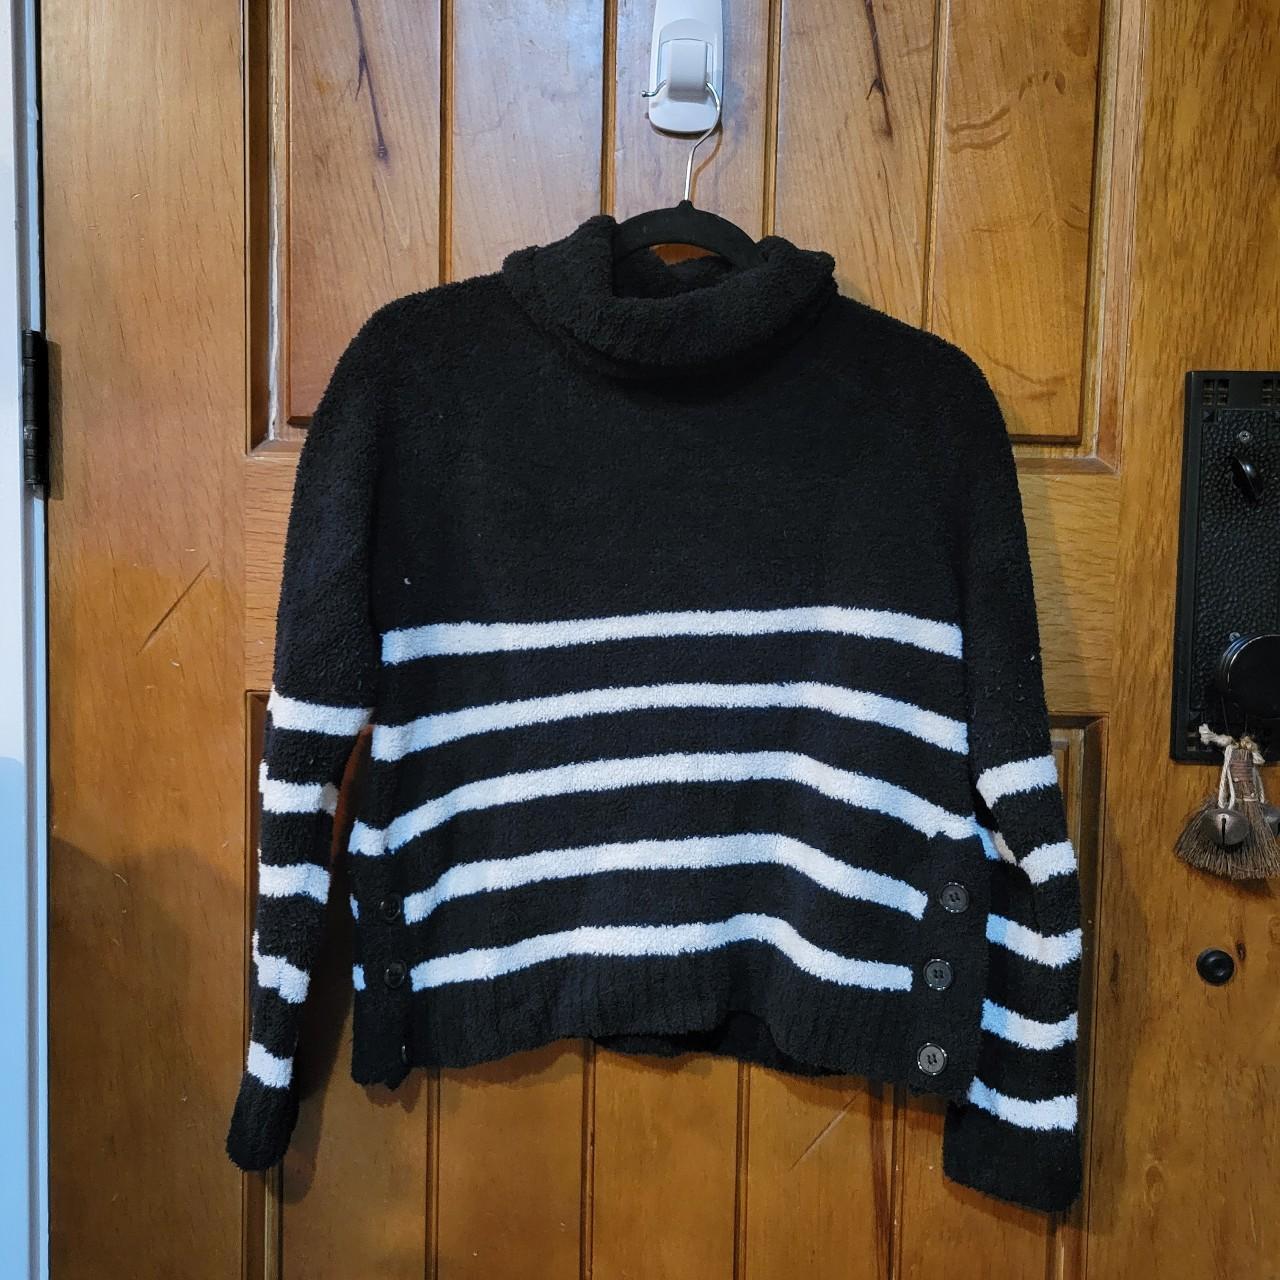 Women's Sonoma stripped sweater Super soft and - Depop